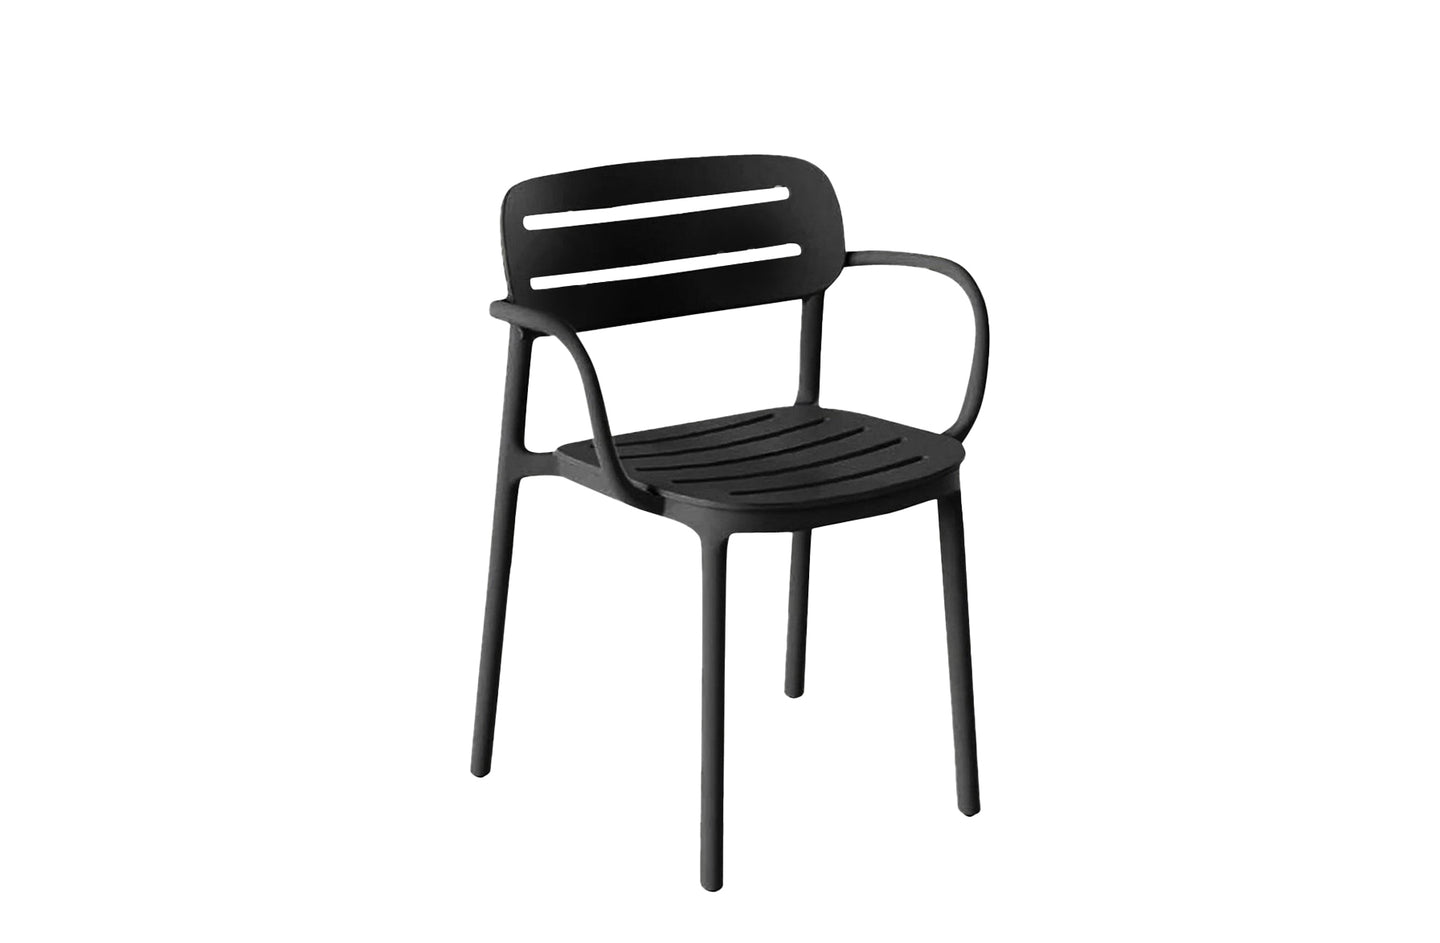 Croisette Chair with Arms
